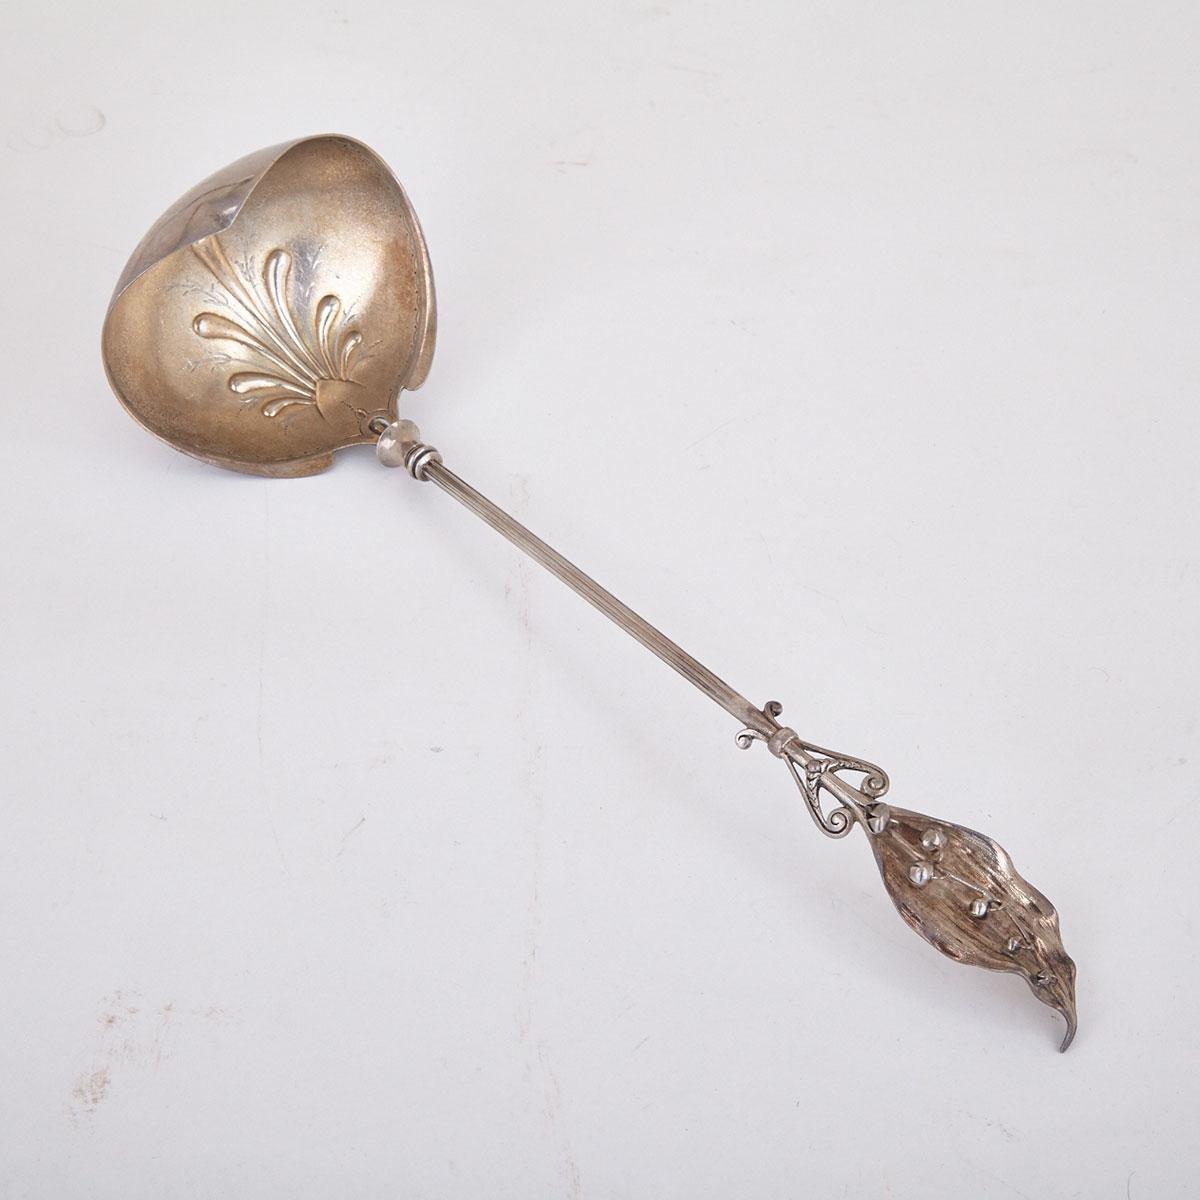 American Silver ‘Lily of the Valley’ Punch Ladle, Gorham Mfg. Co., Providence, R.I., c.1870